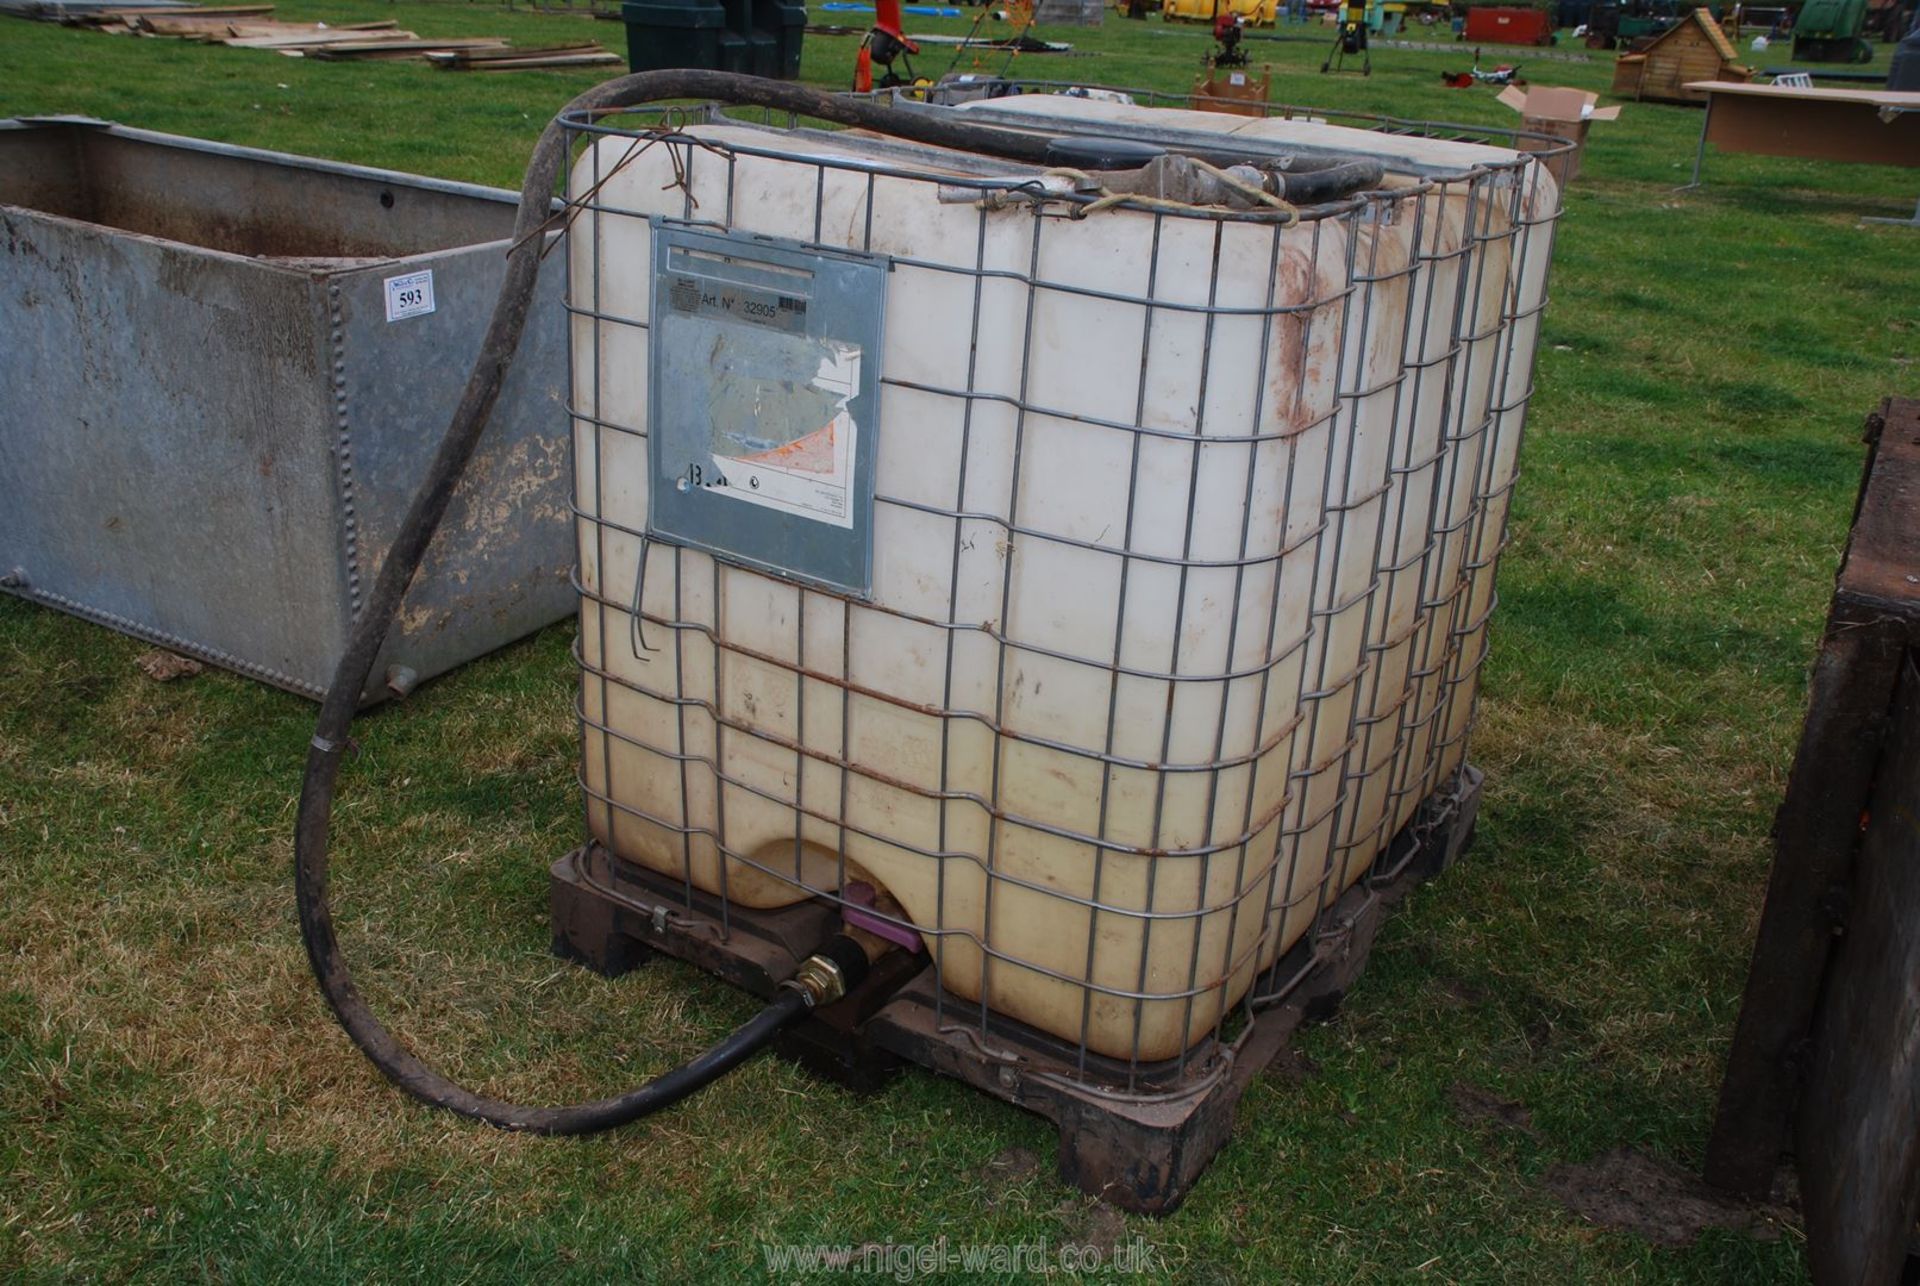 An IBC tank with fuel delivery hose.